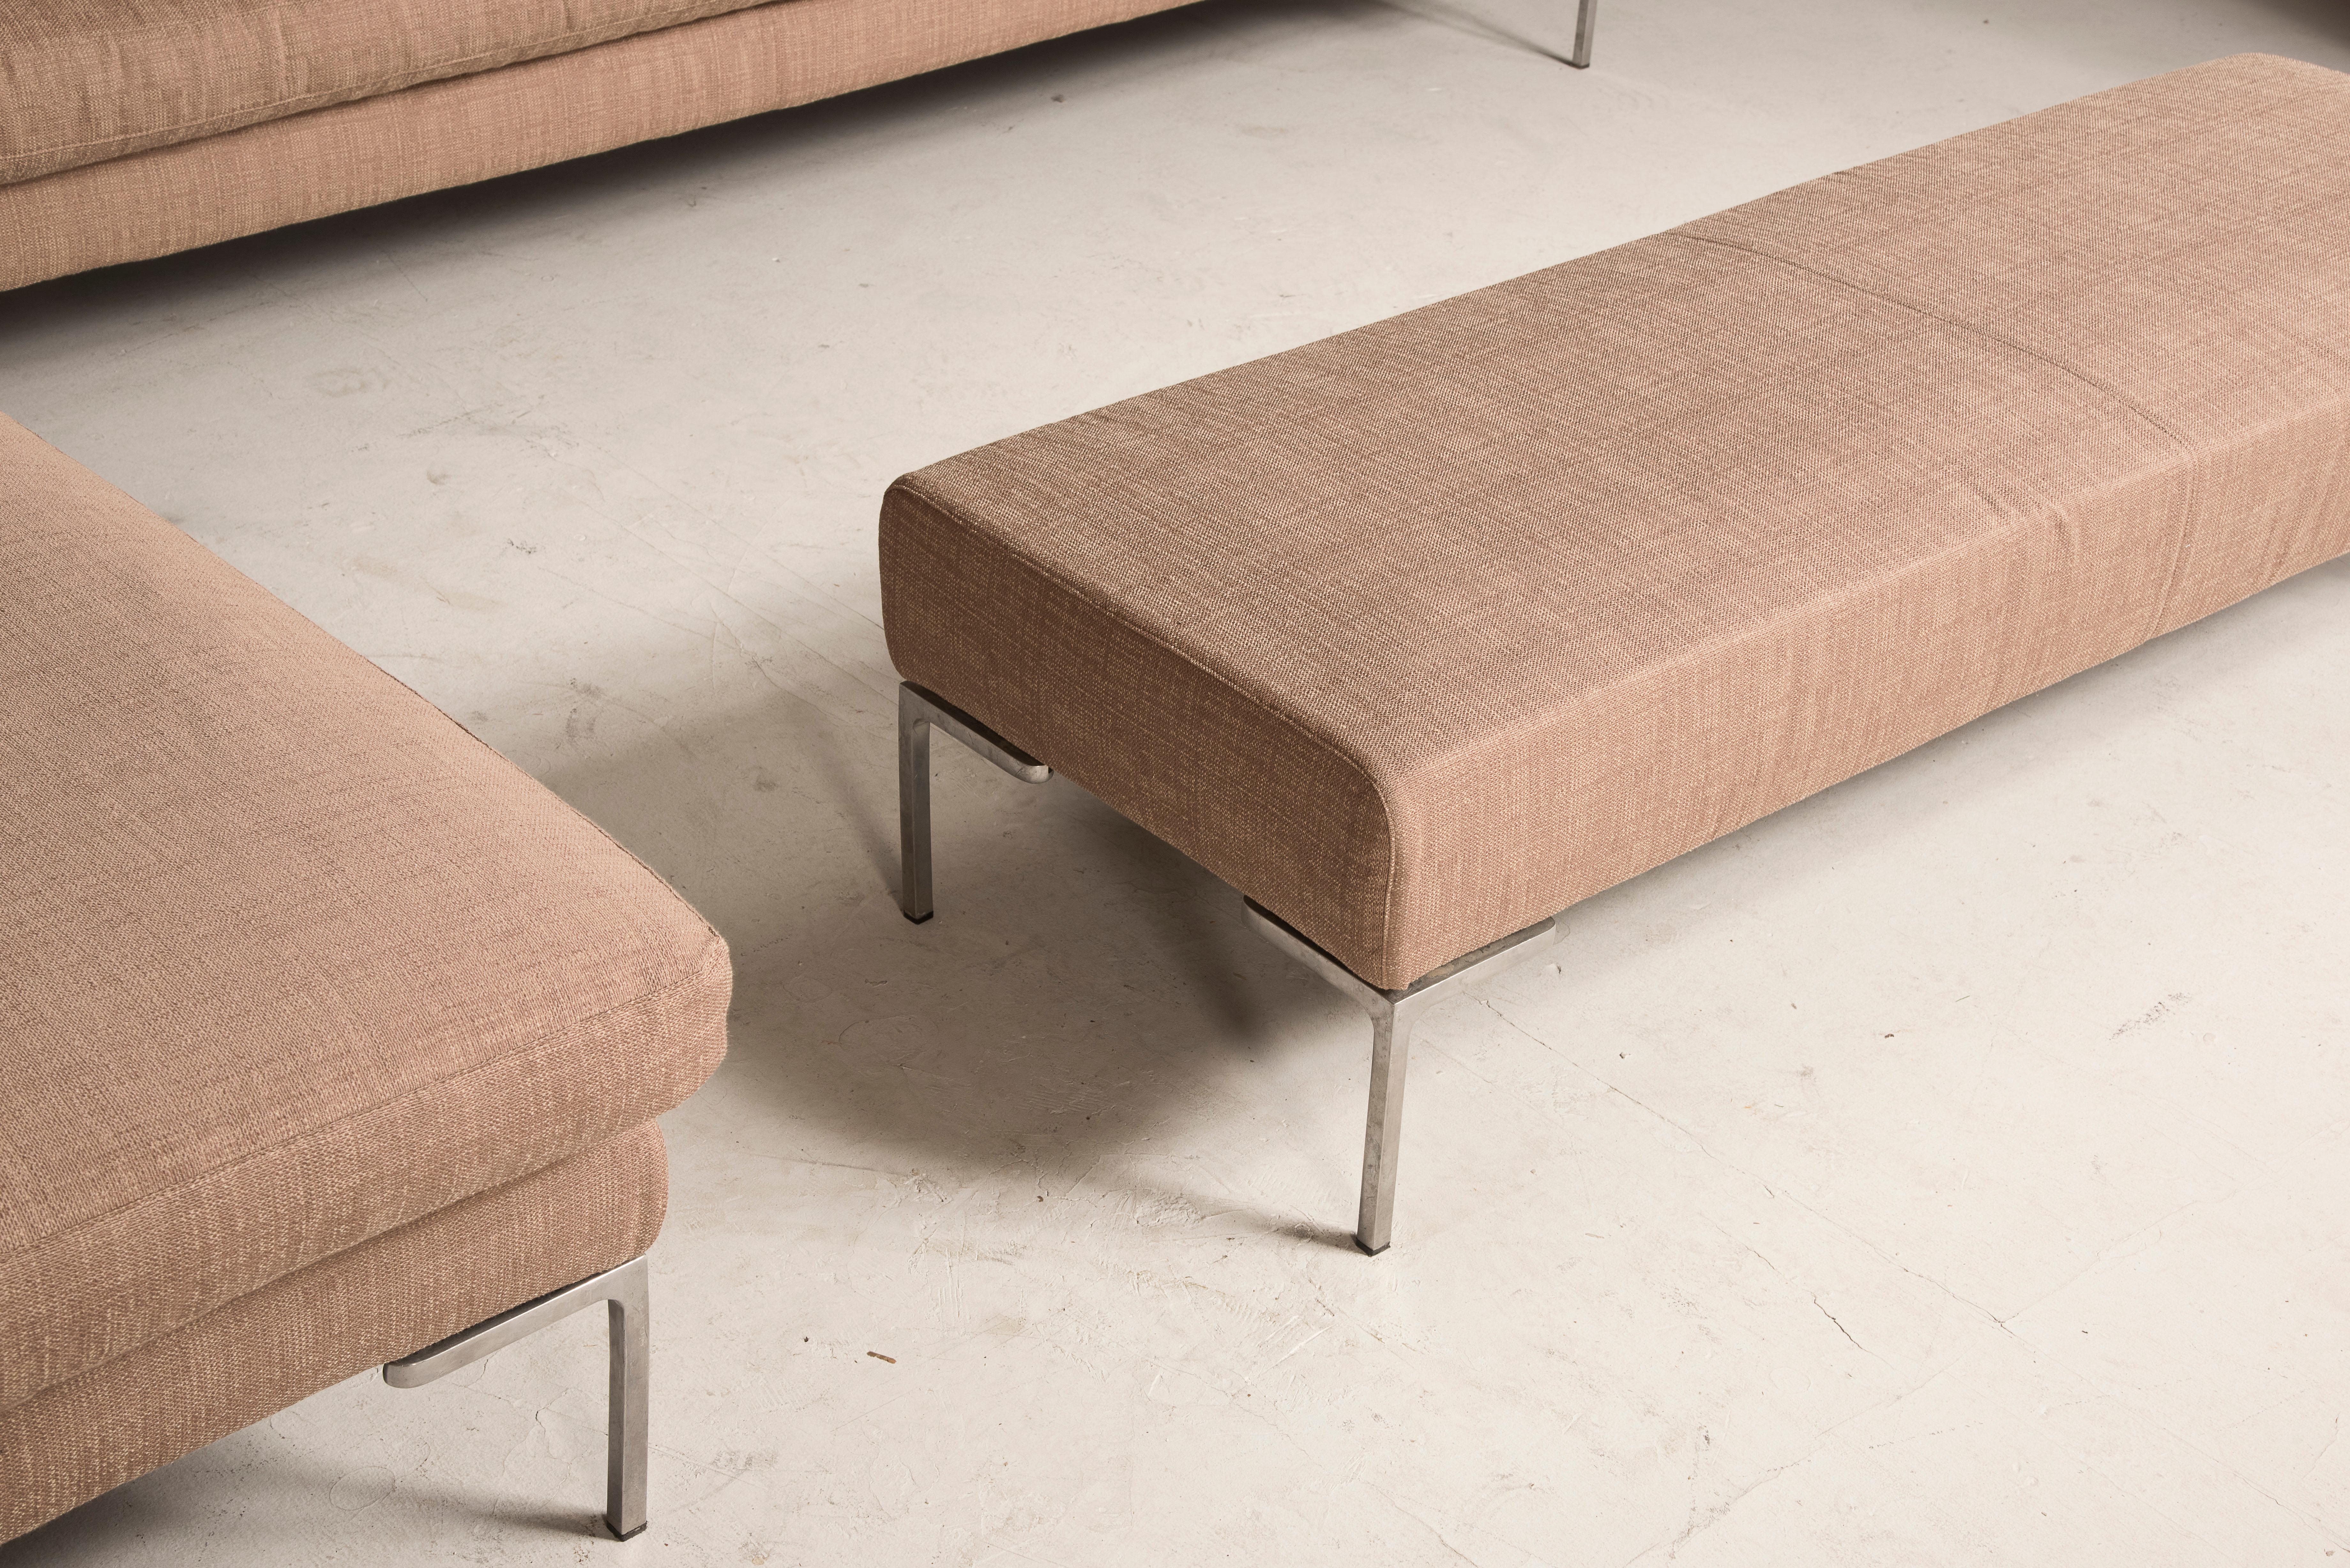 Charles Model by Antonio Citterio for B&B Italia Beige Color Sofà and Bench Set 2